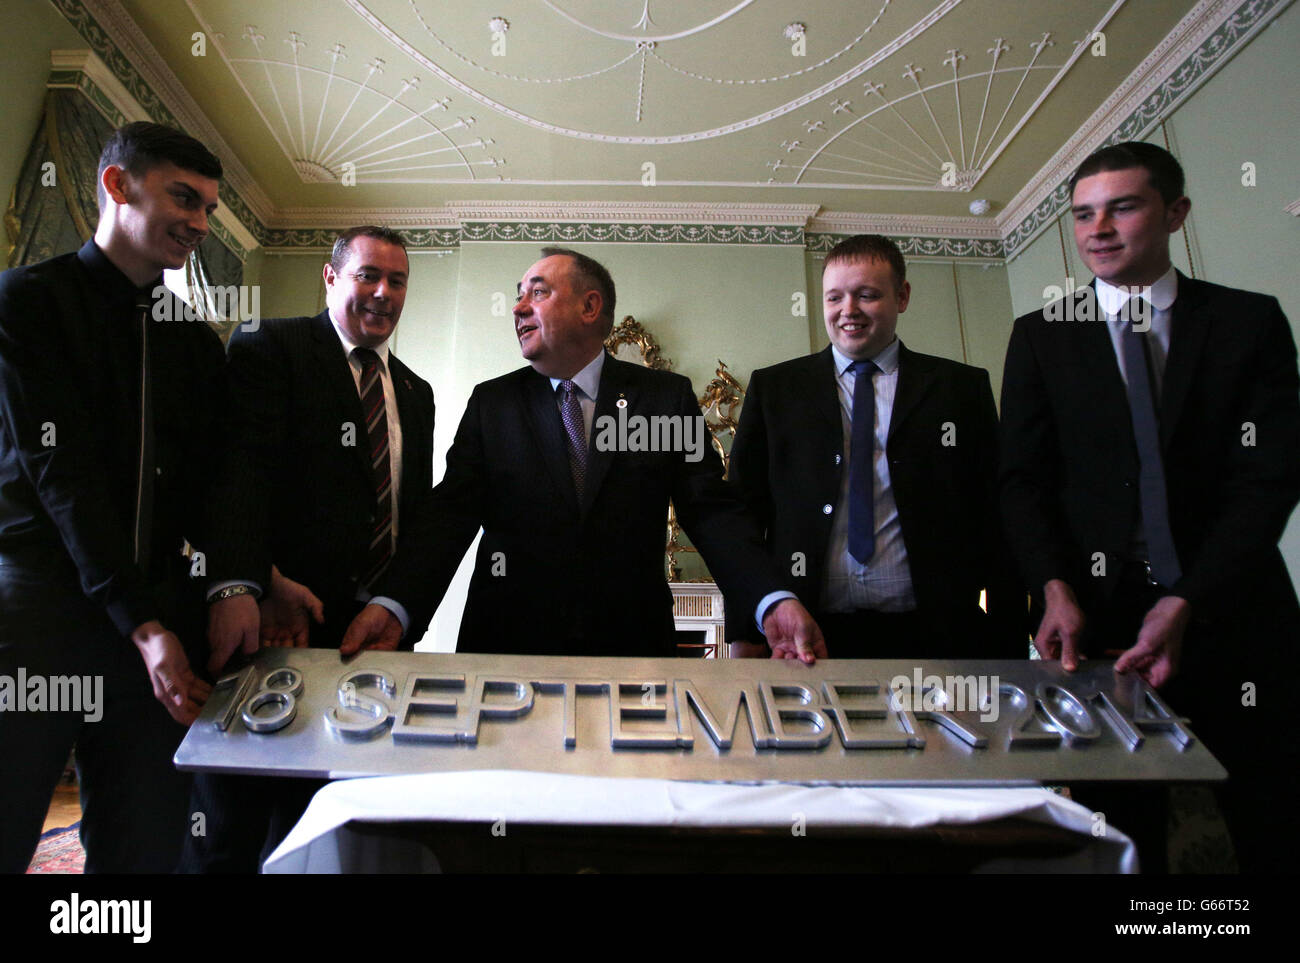 The Scottish First Minister Alex Salmond is presented with a welded referendum date from Steel Engineering at Bute House Edinburgh. Stock Photo